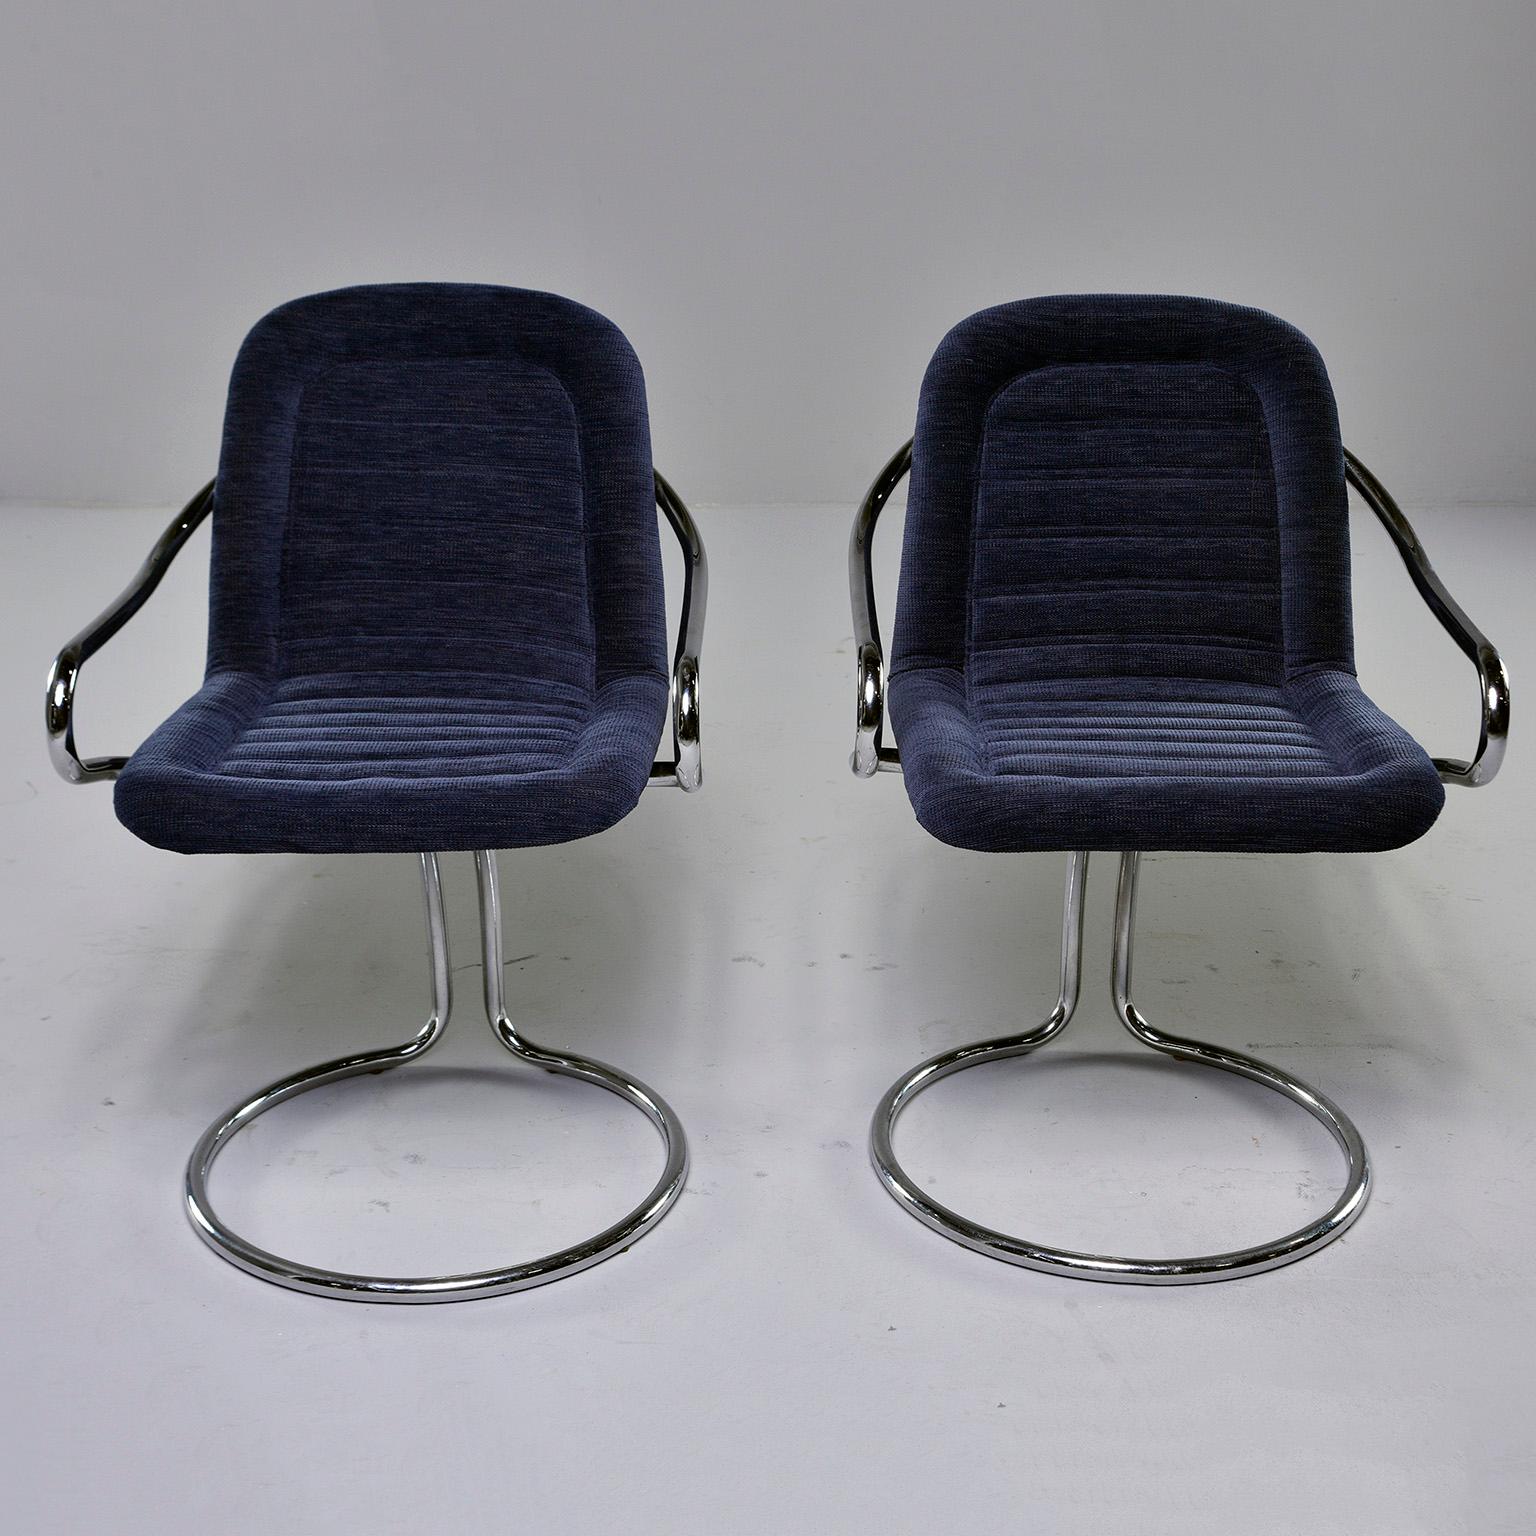 Found in Italy, this pair of circa 1970s armchairs feature polished chrome frames with a circle form base and curved arms. Seats are scoop shaped with new navy blue chenille upholstery. The base gives these chairs a bit of bounce and give. Unknown